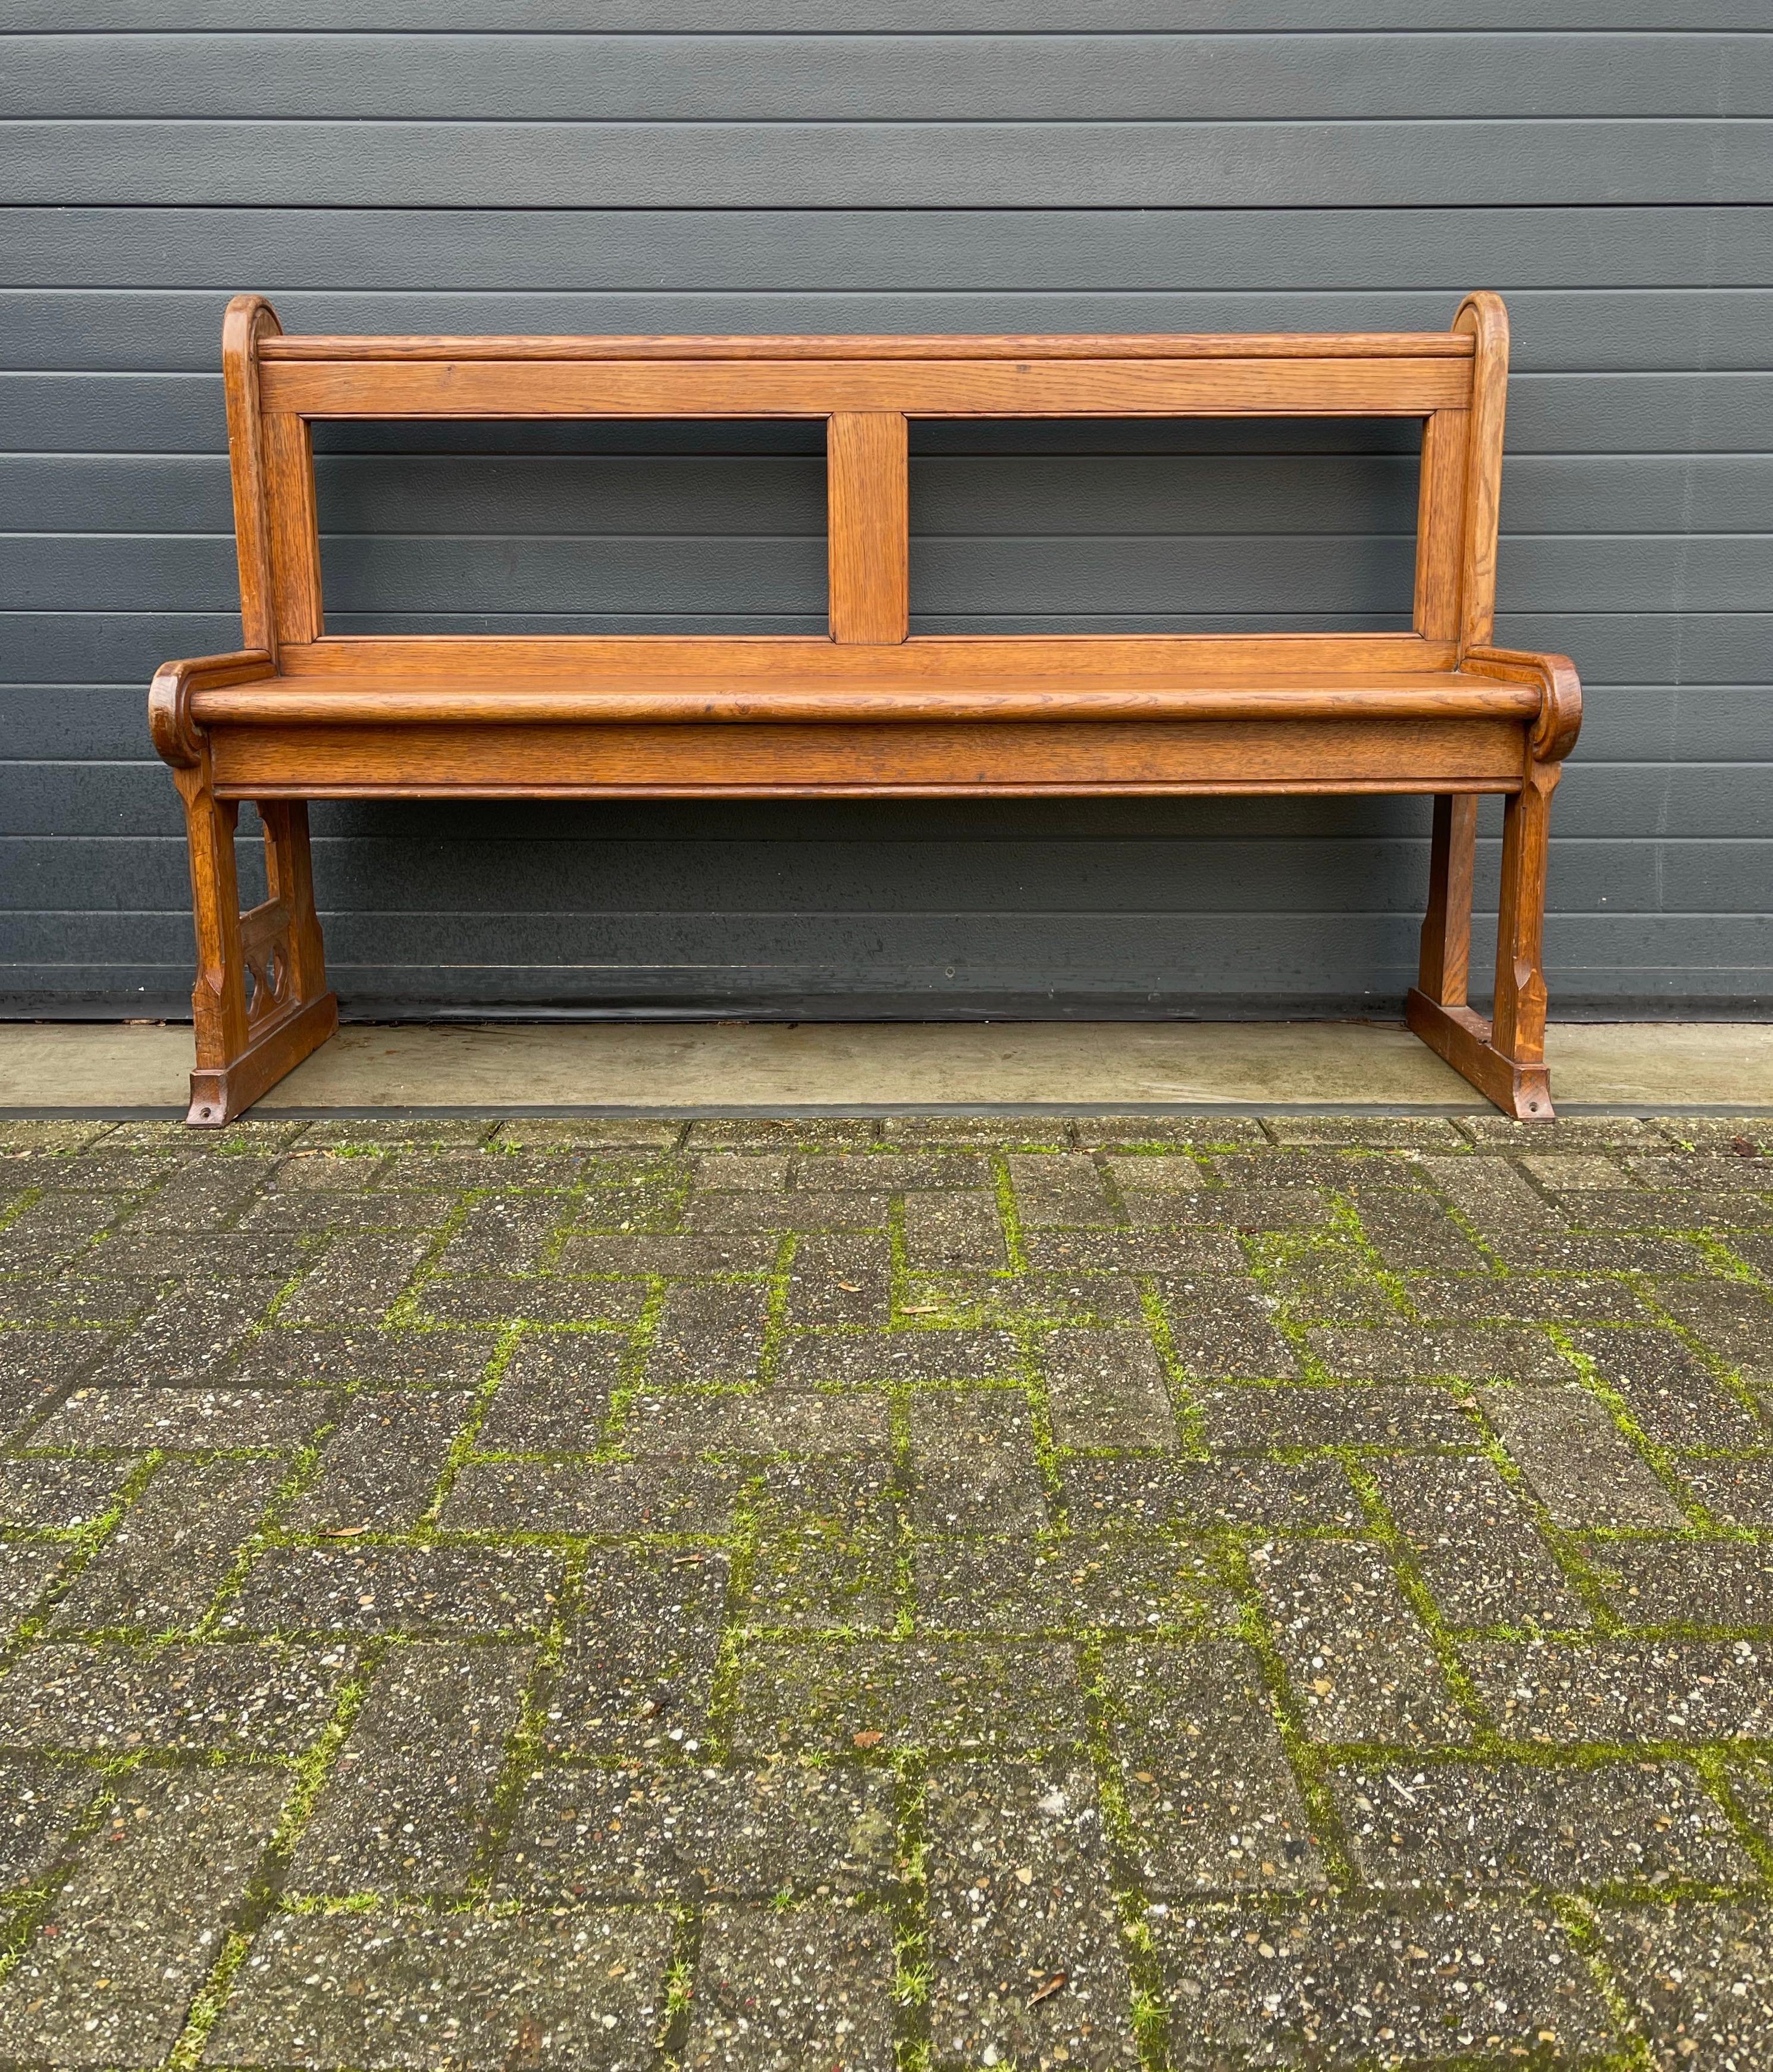 Antique and Handcrafted Gothic Revival Solid Tiger Oak Practical Hallway Bench For Sale 11